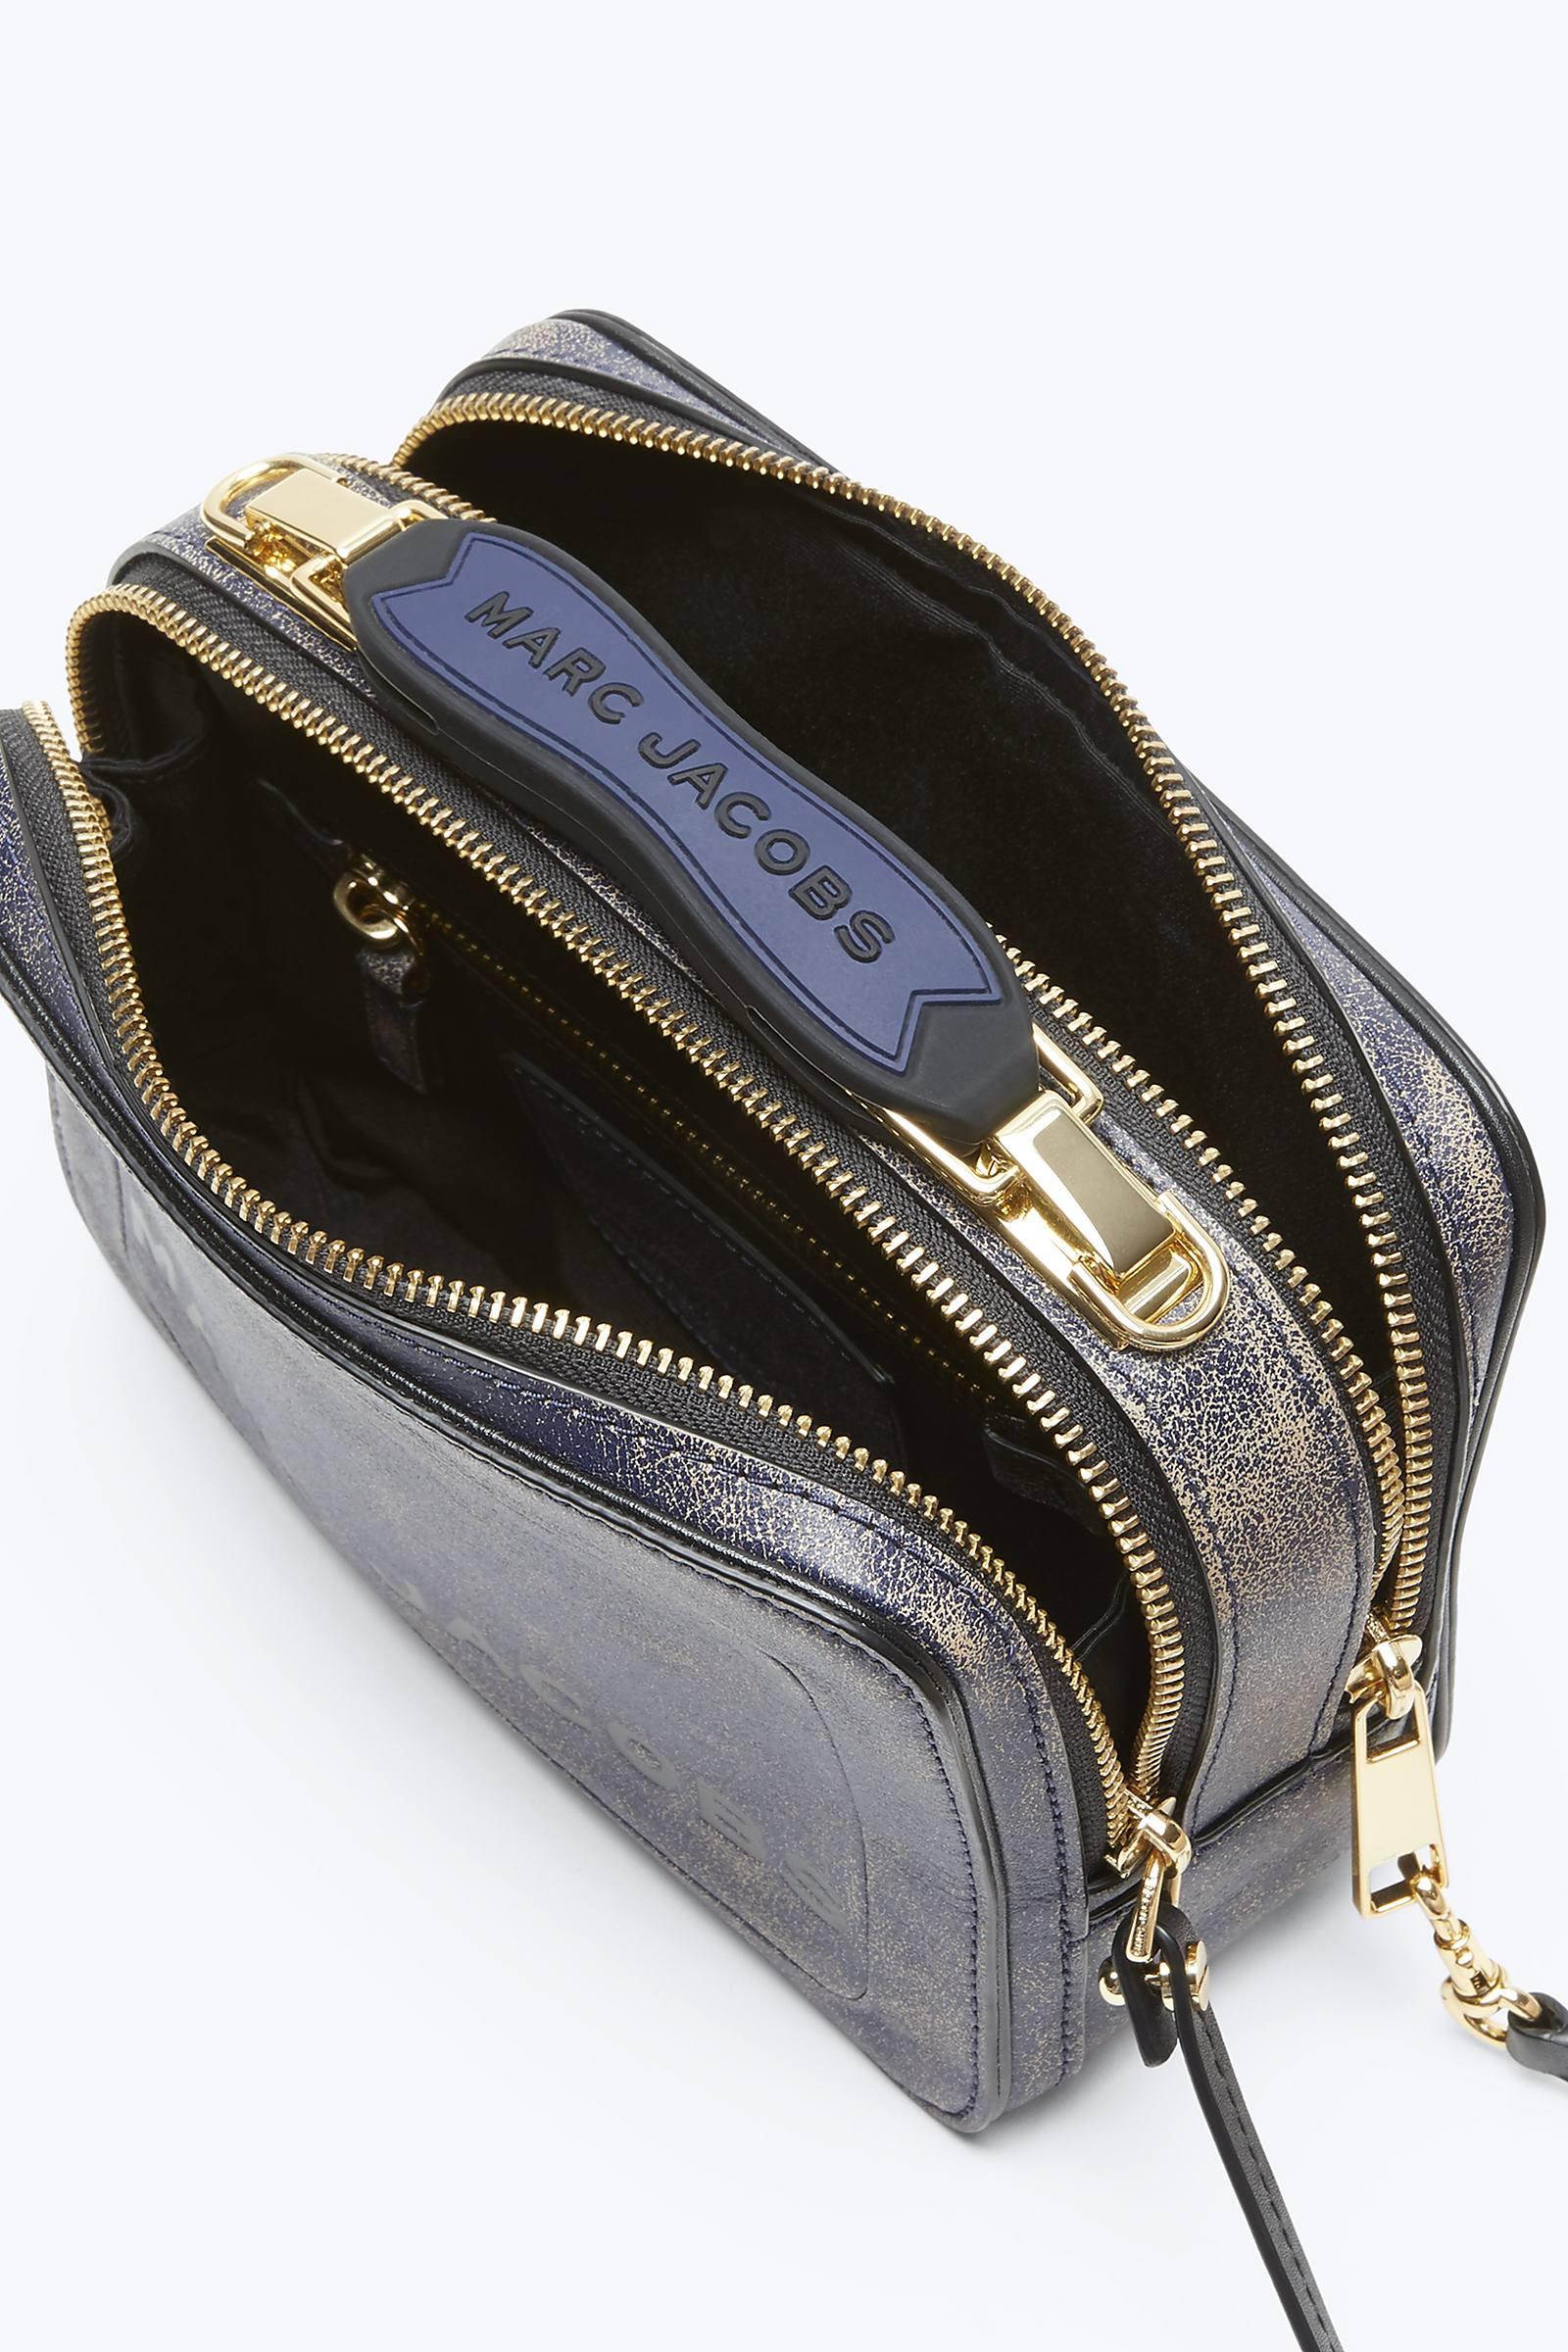 Marc Jacobs The Box 20 Bag In Navy Cow Leather in Blue - Lyst